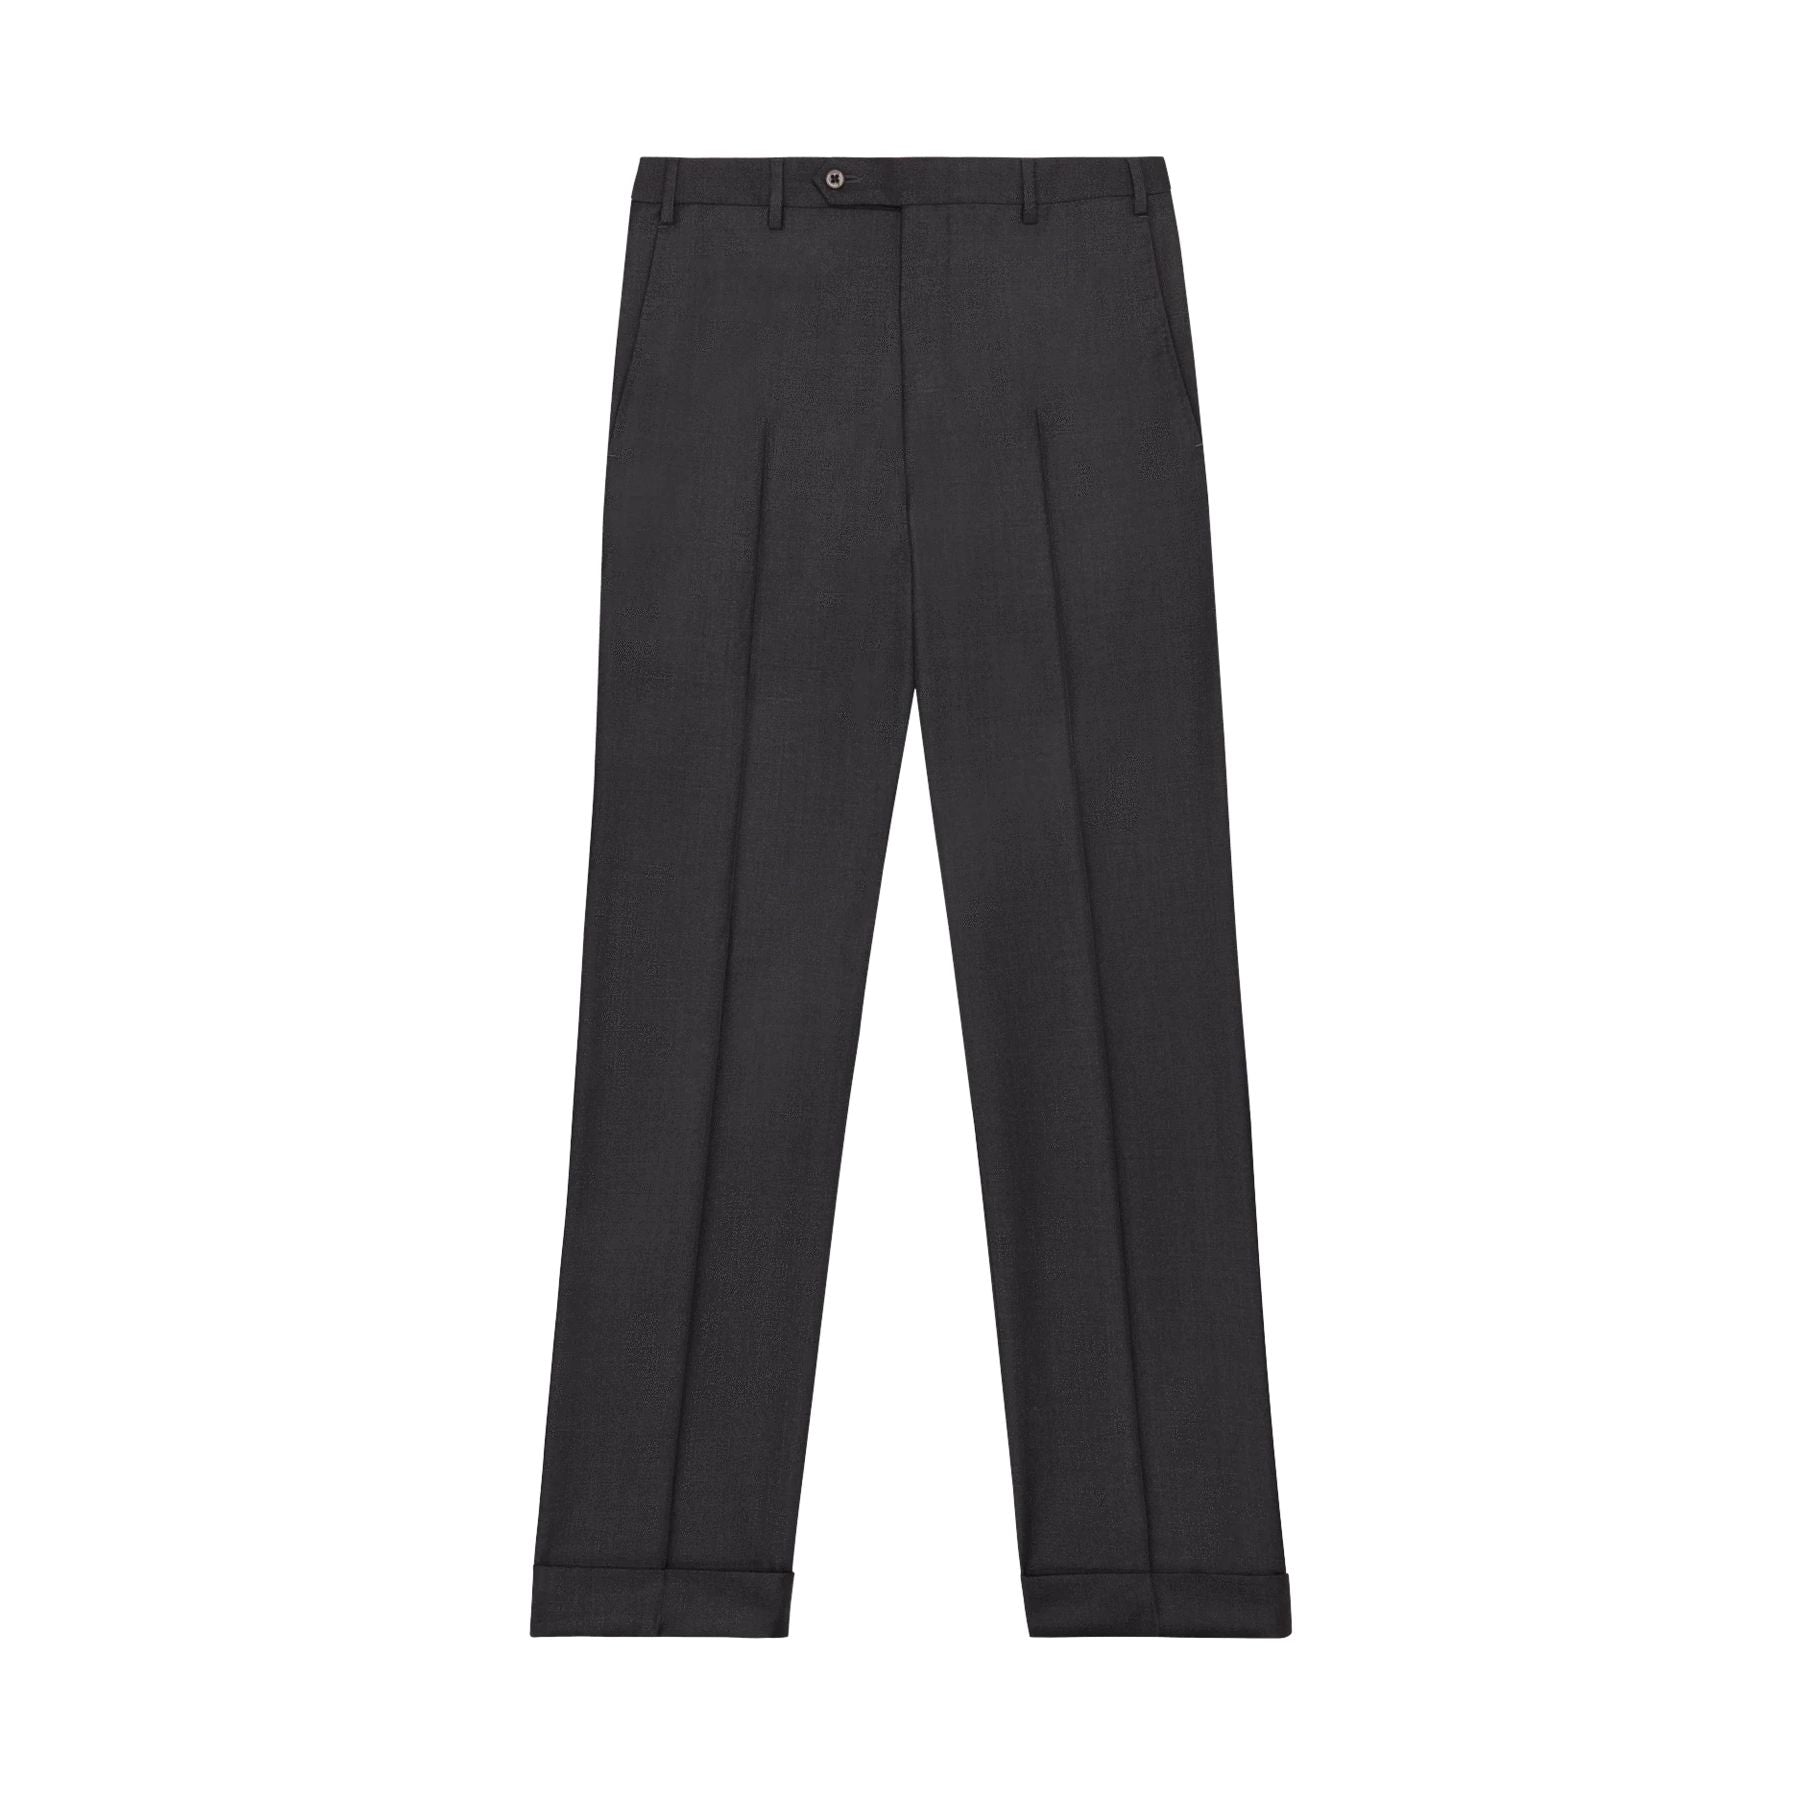 Todd Flat Front Super 120s Wool Serge Trouser in Charcoal (Full Fit) by Zanella